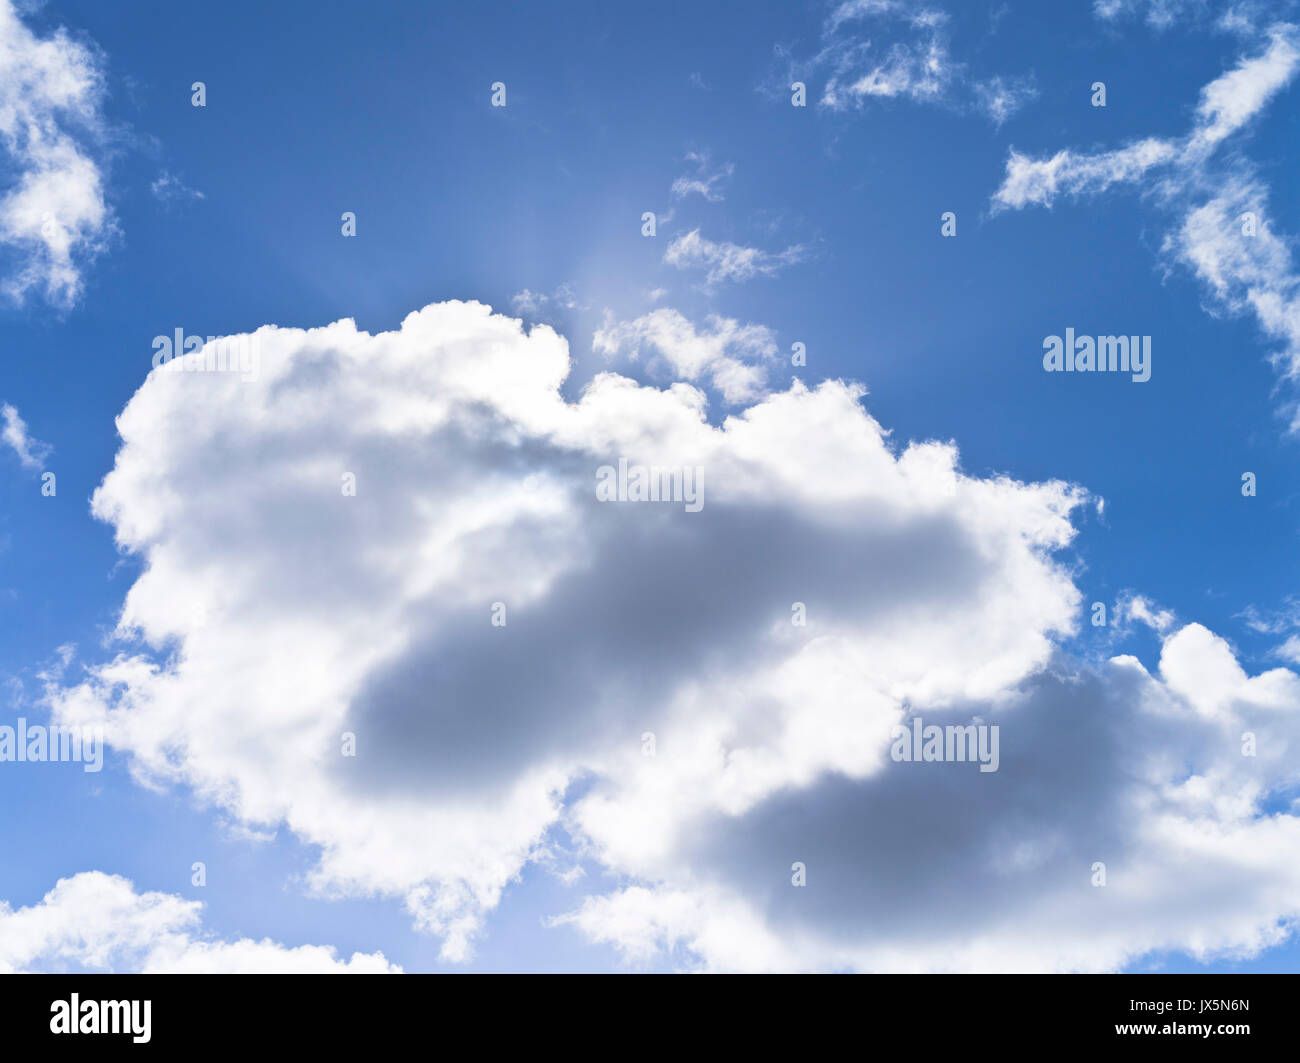 dh White Clouds SKY UK Backlit Cloud Blue Sky White Grey Clouds Puffy flauschige Wolkenlandschaft Tag Stockfoto